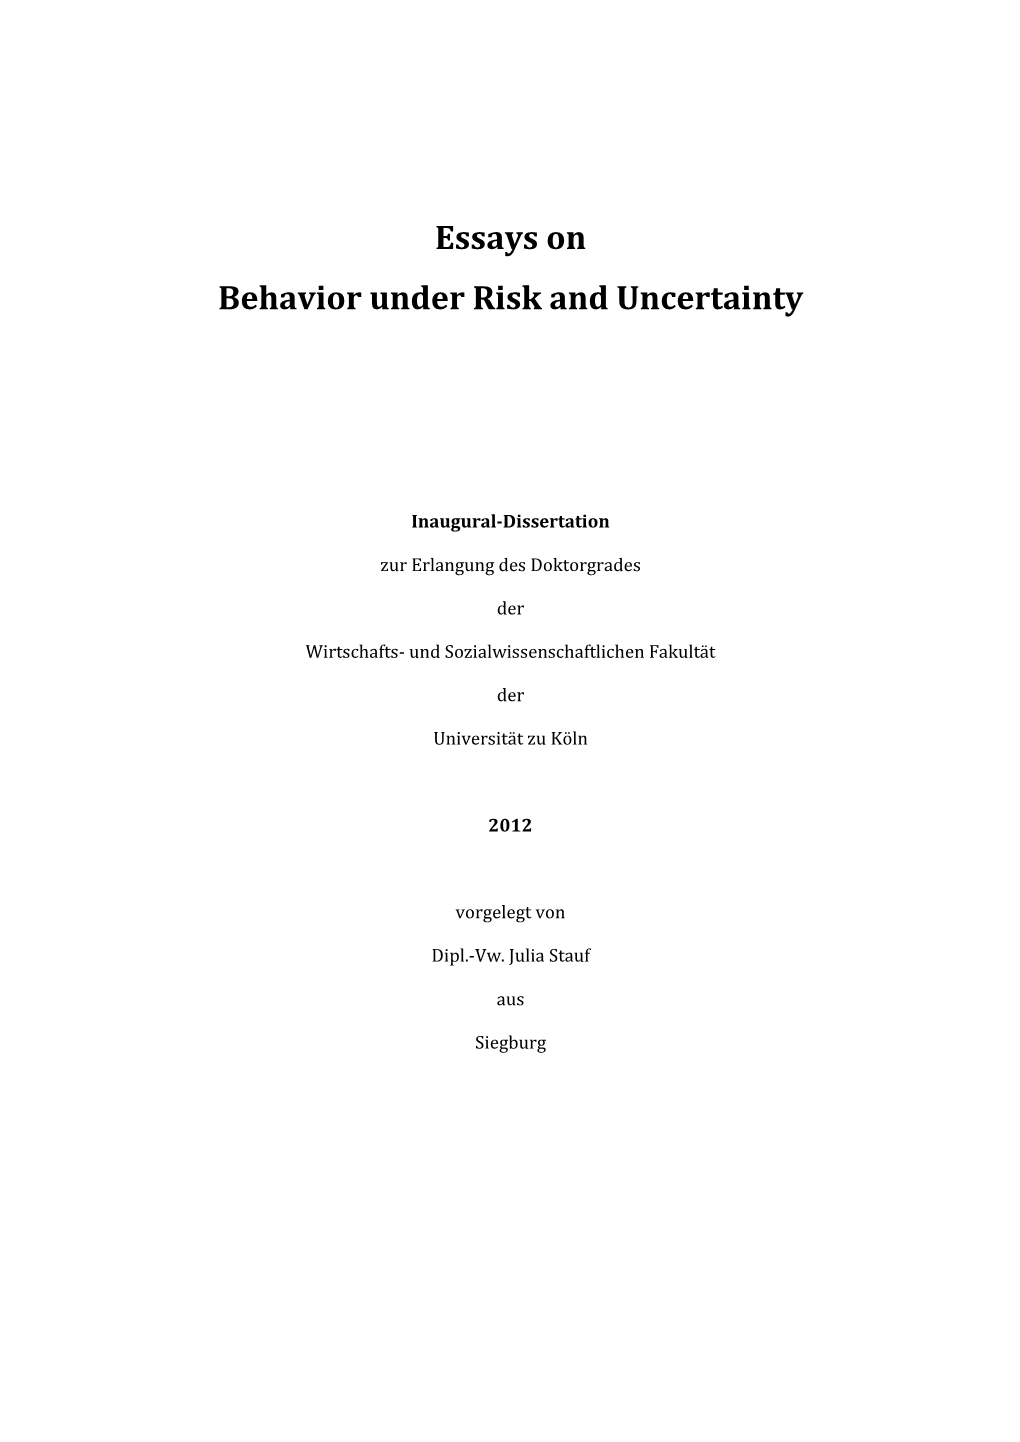 Essays on Behavior Under Risk and Uncertainty